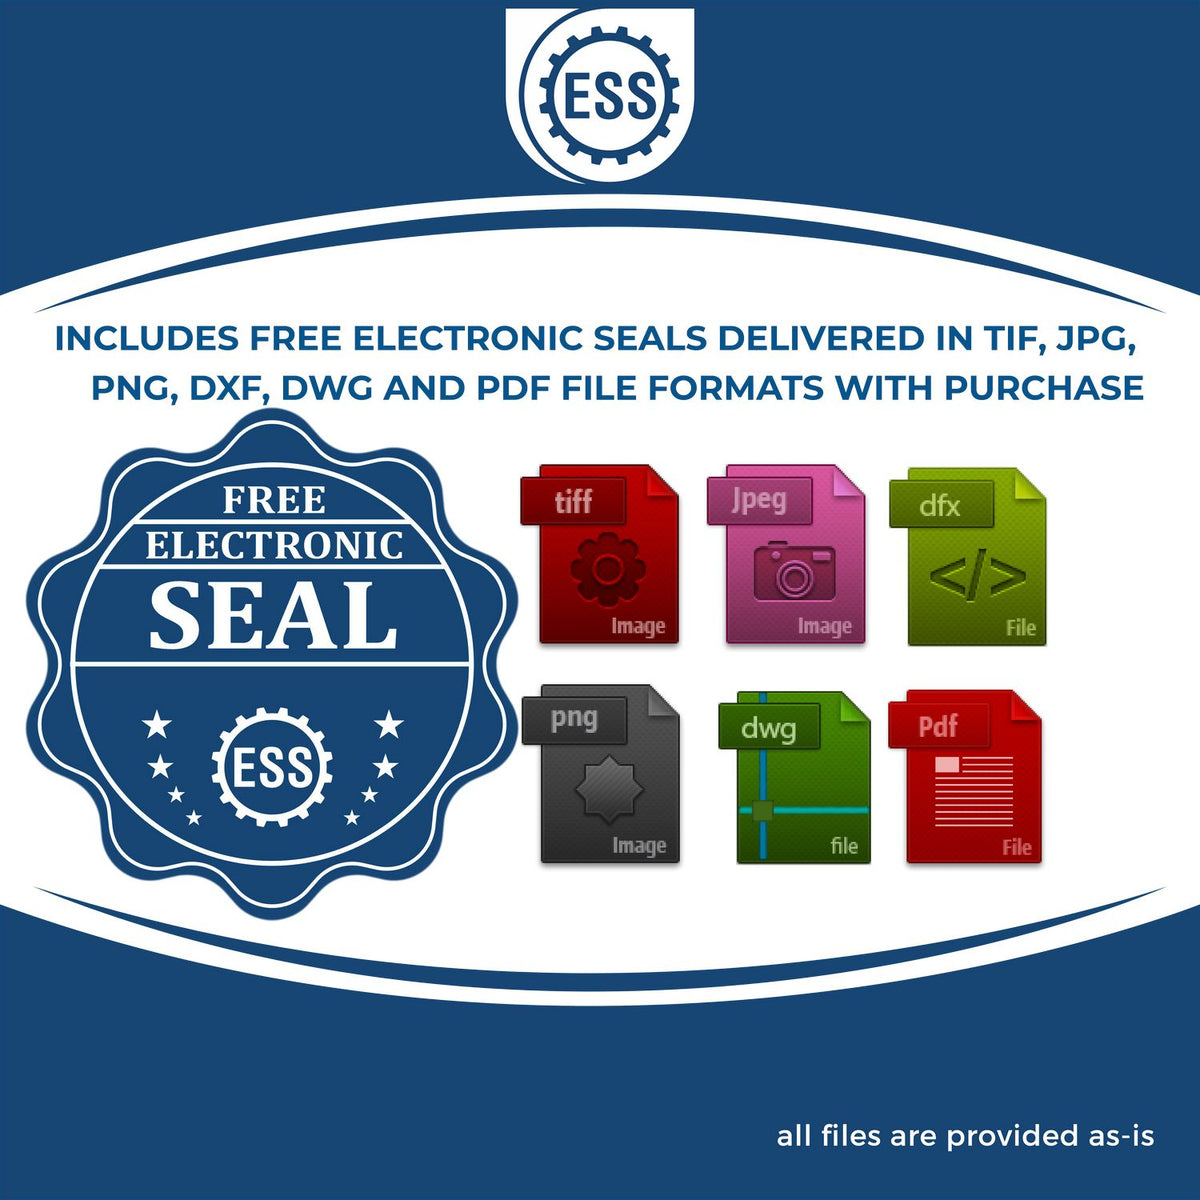 An infographic for the free electronic seal for the New York Geologist Desk Seal illustrating the different file type icons such as DXF, DWG, TIF, JPG and PNG.